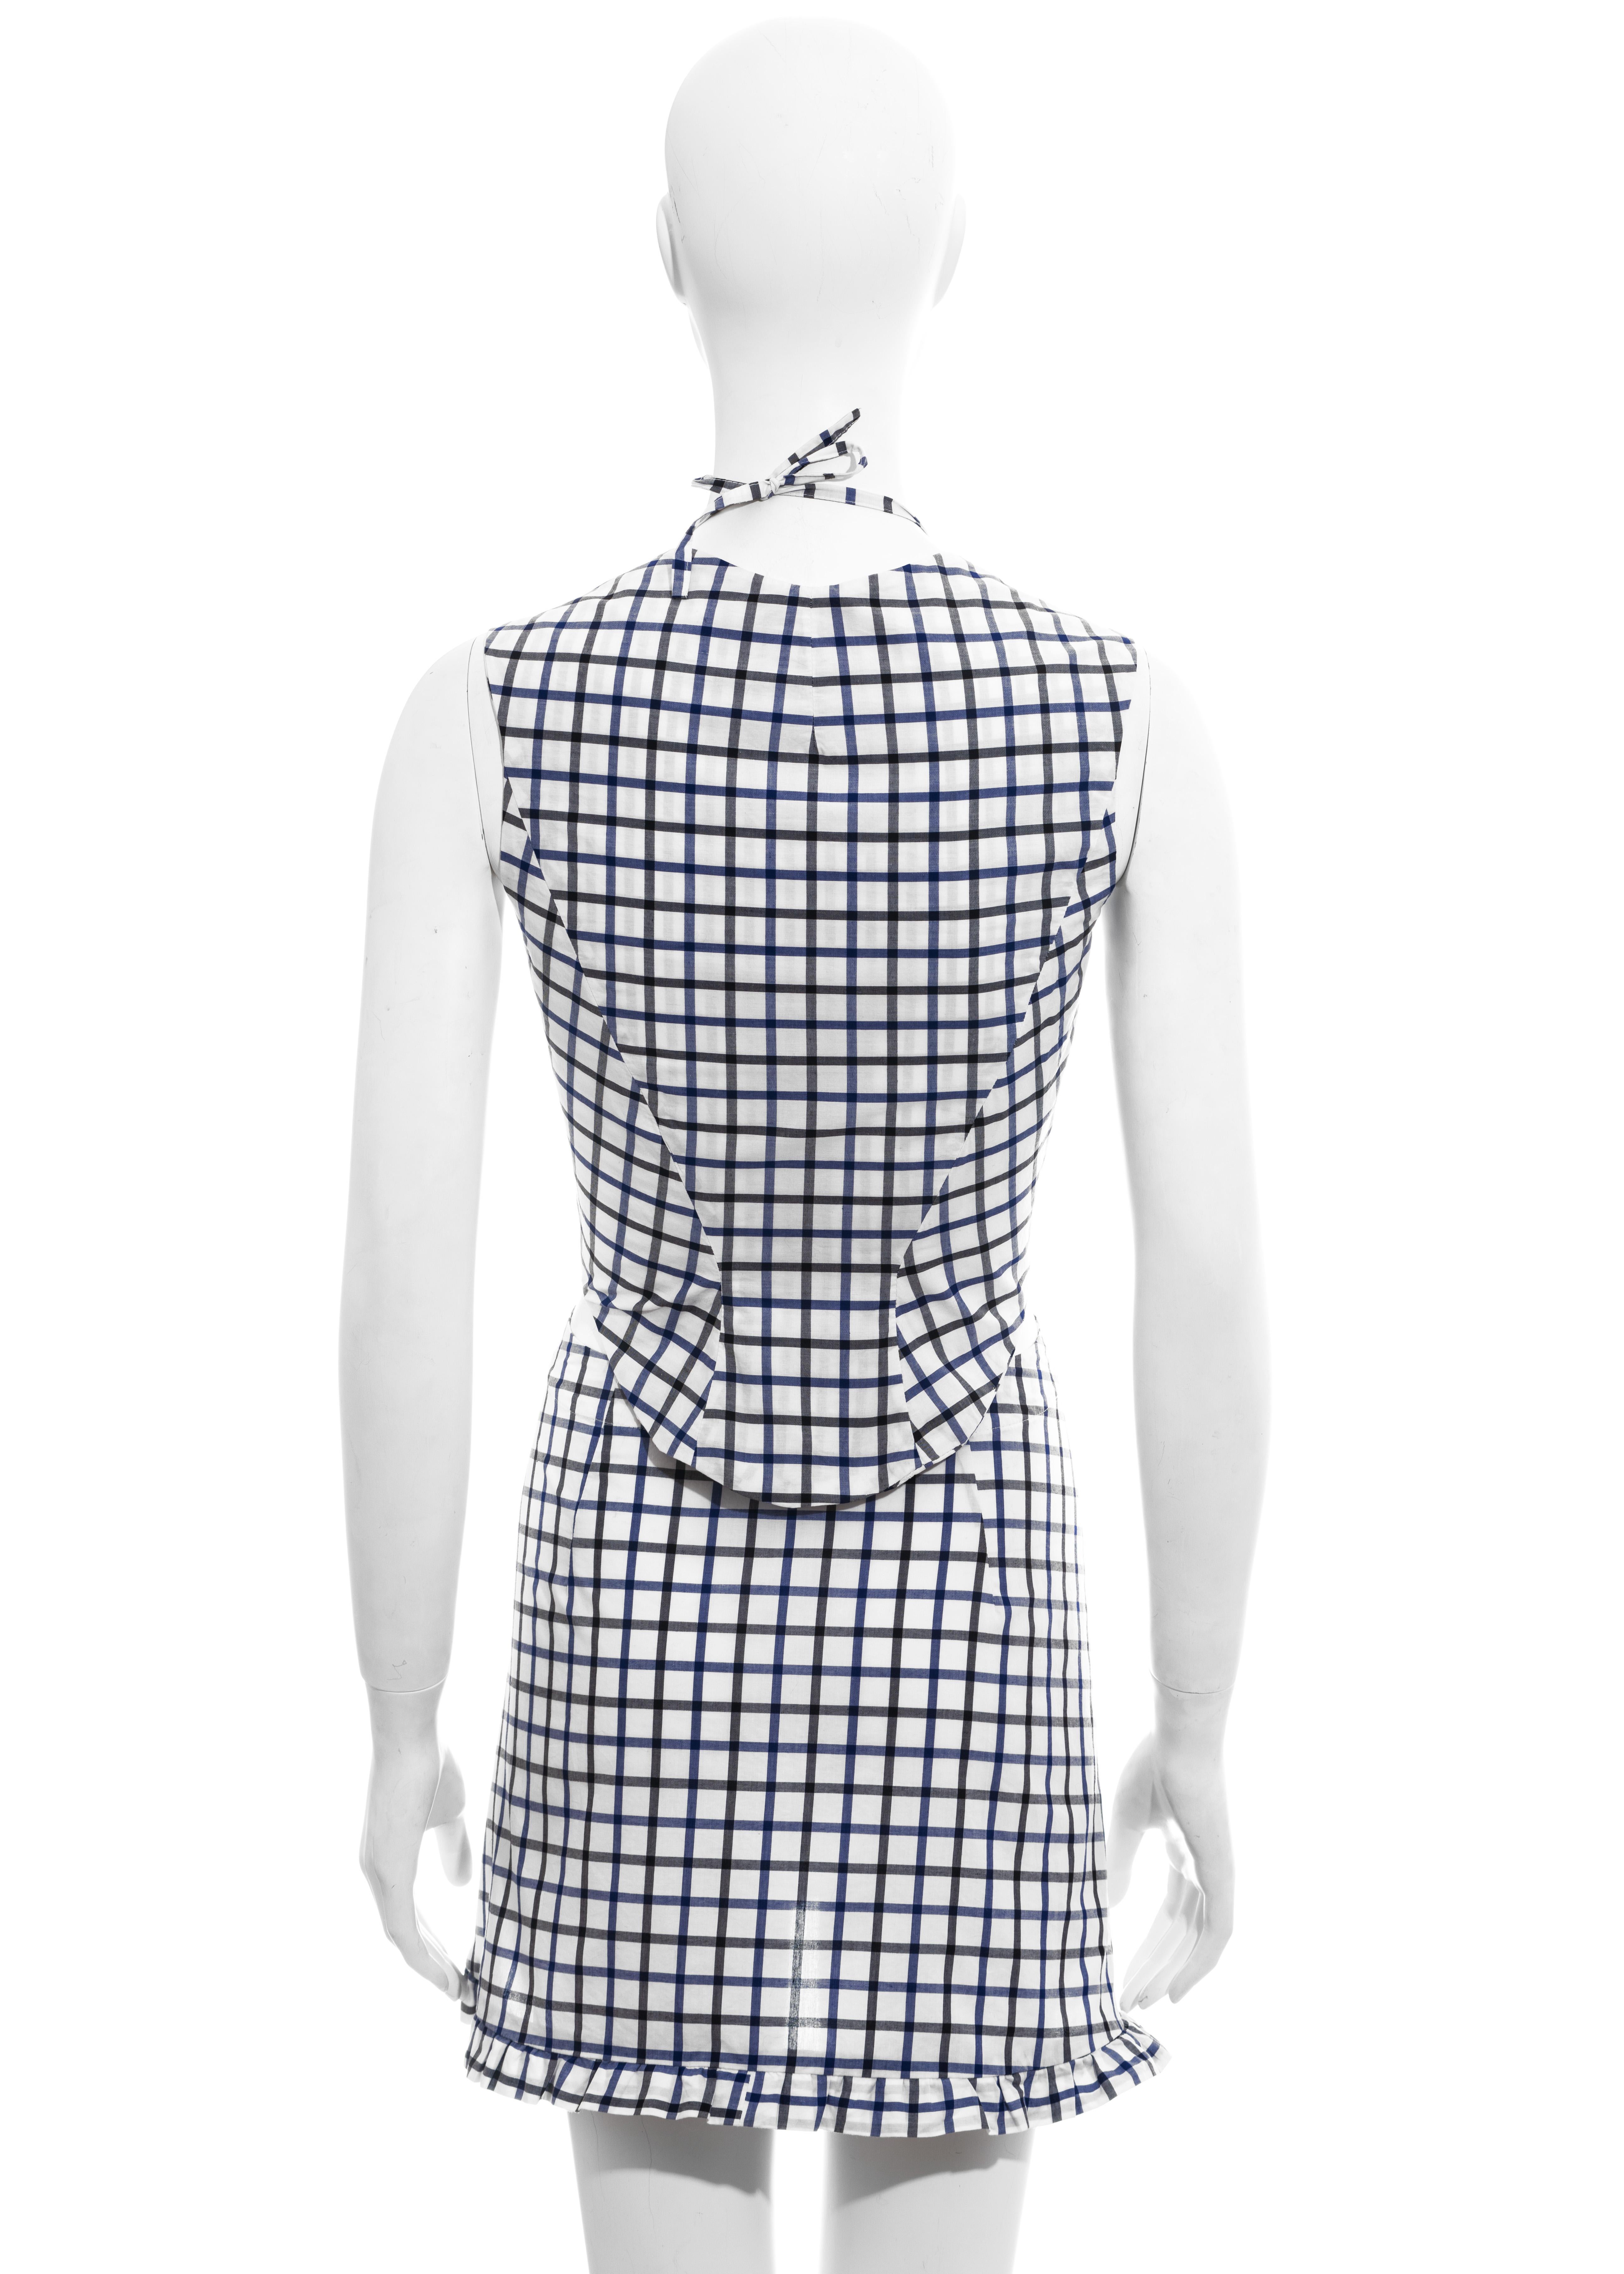 Women's Vivienne Westwood blue and white checked cotton skirt suit, ss 1994